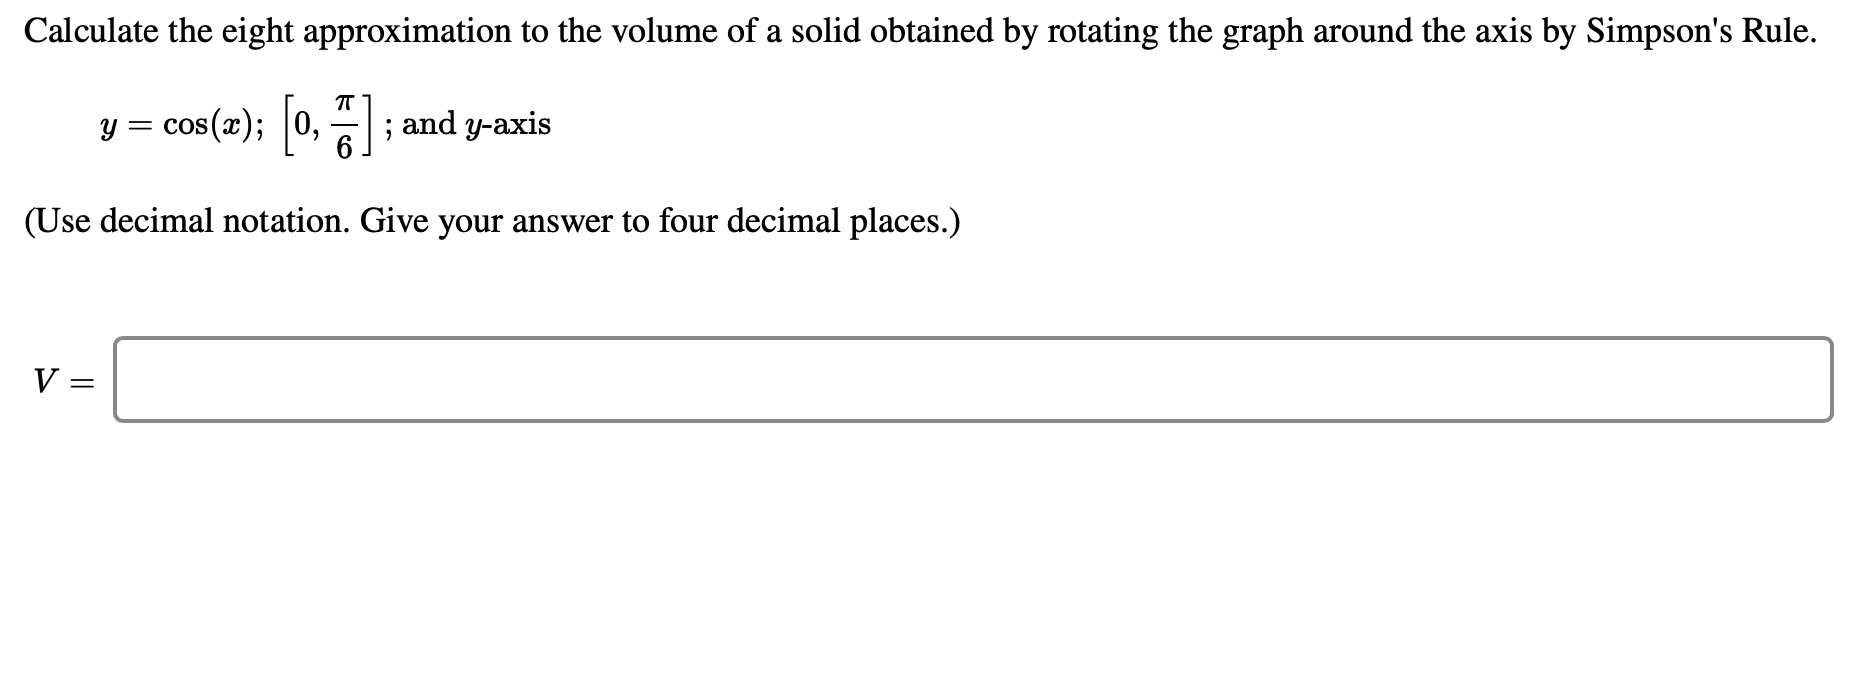 Calculate the eight approximation to the volume of a solid obtained by rotating the graph around the axis by Simpson's Rule.
y = cos(x); 0, ;
and y-axis
(Use decimal notation. Give your answer to four decimal places.)
||
